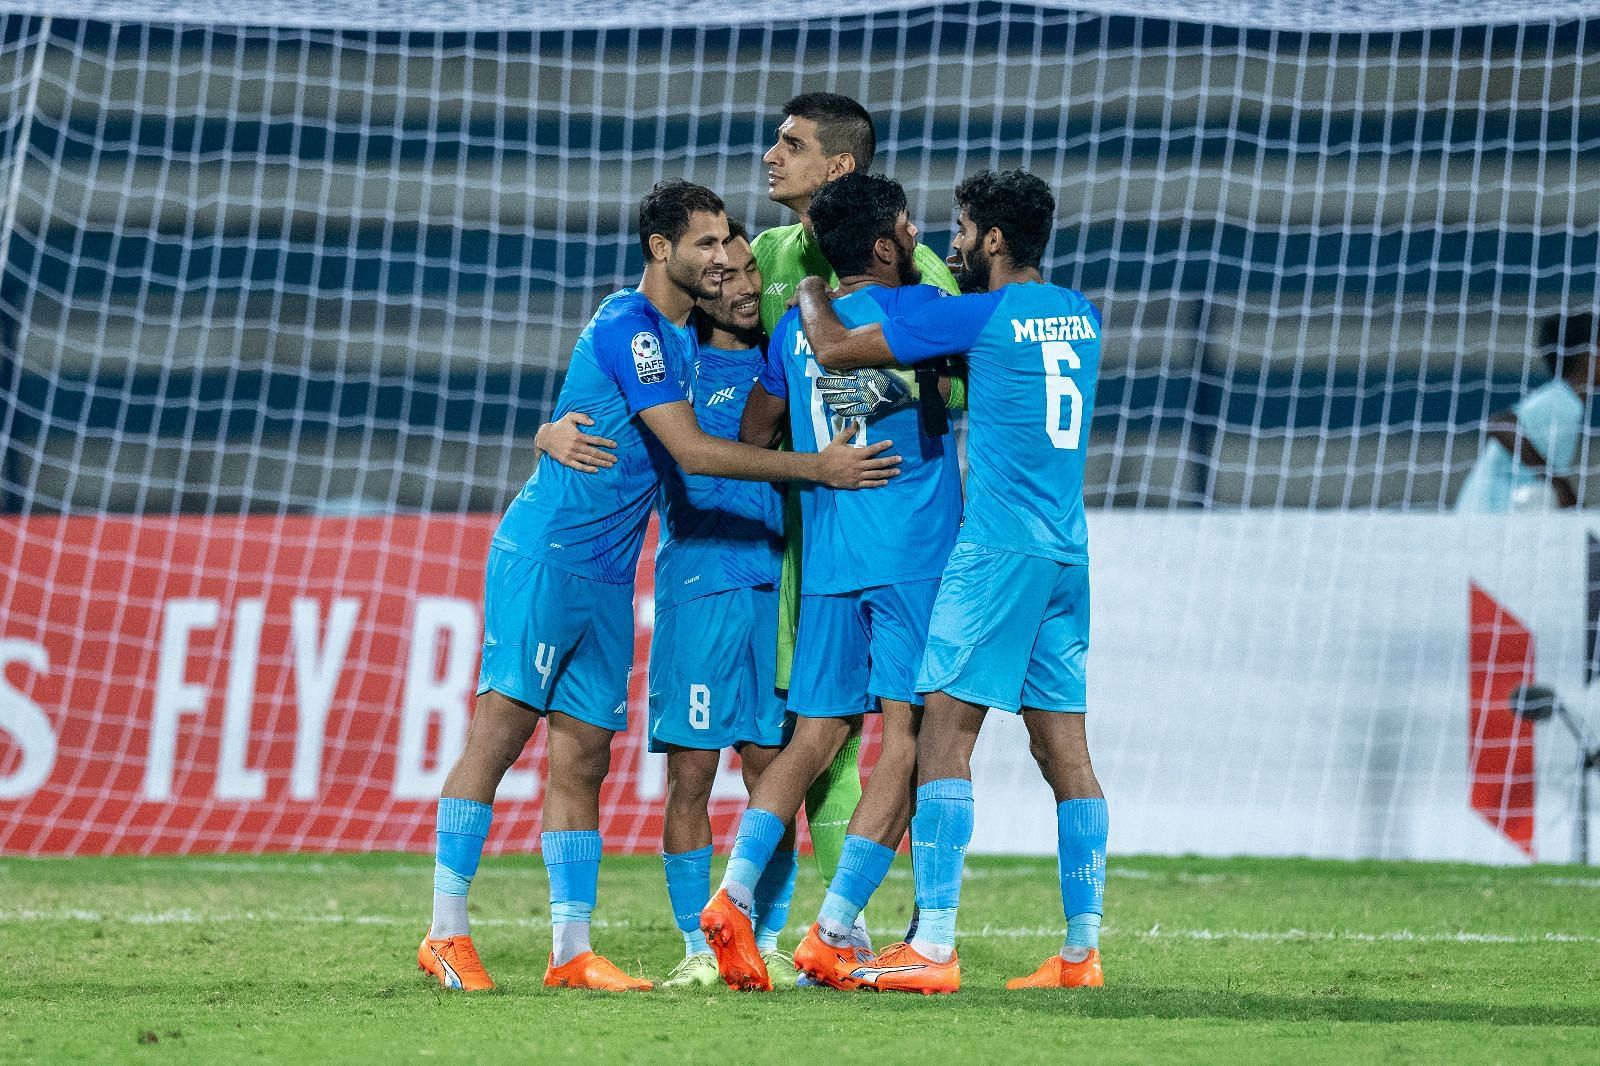 The Blue TIgers qualified for the finals of the SAFF Championship 2023 (Image courtesy: AIFF Media)